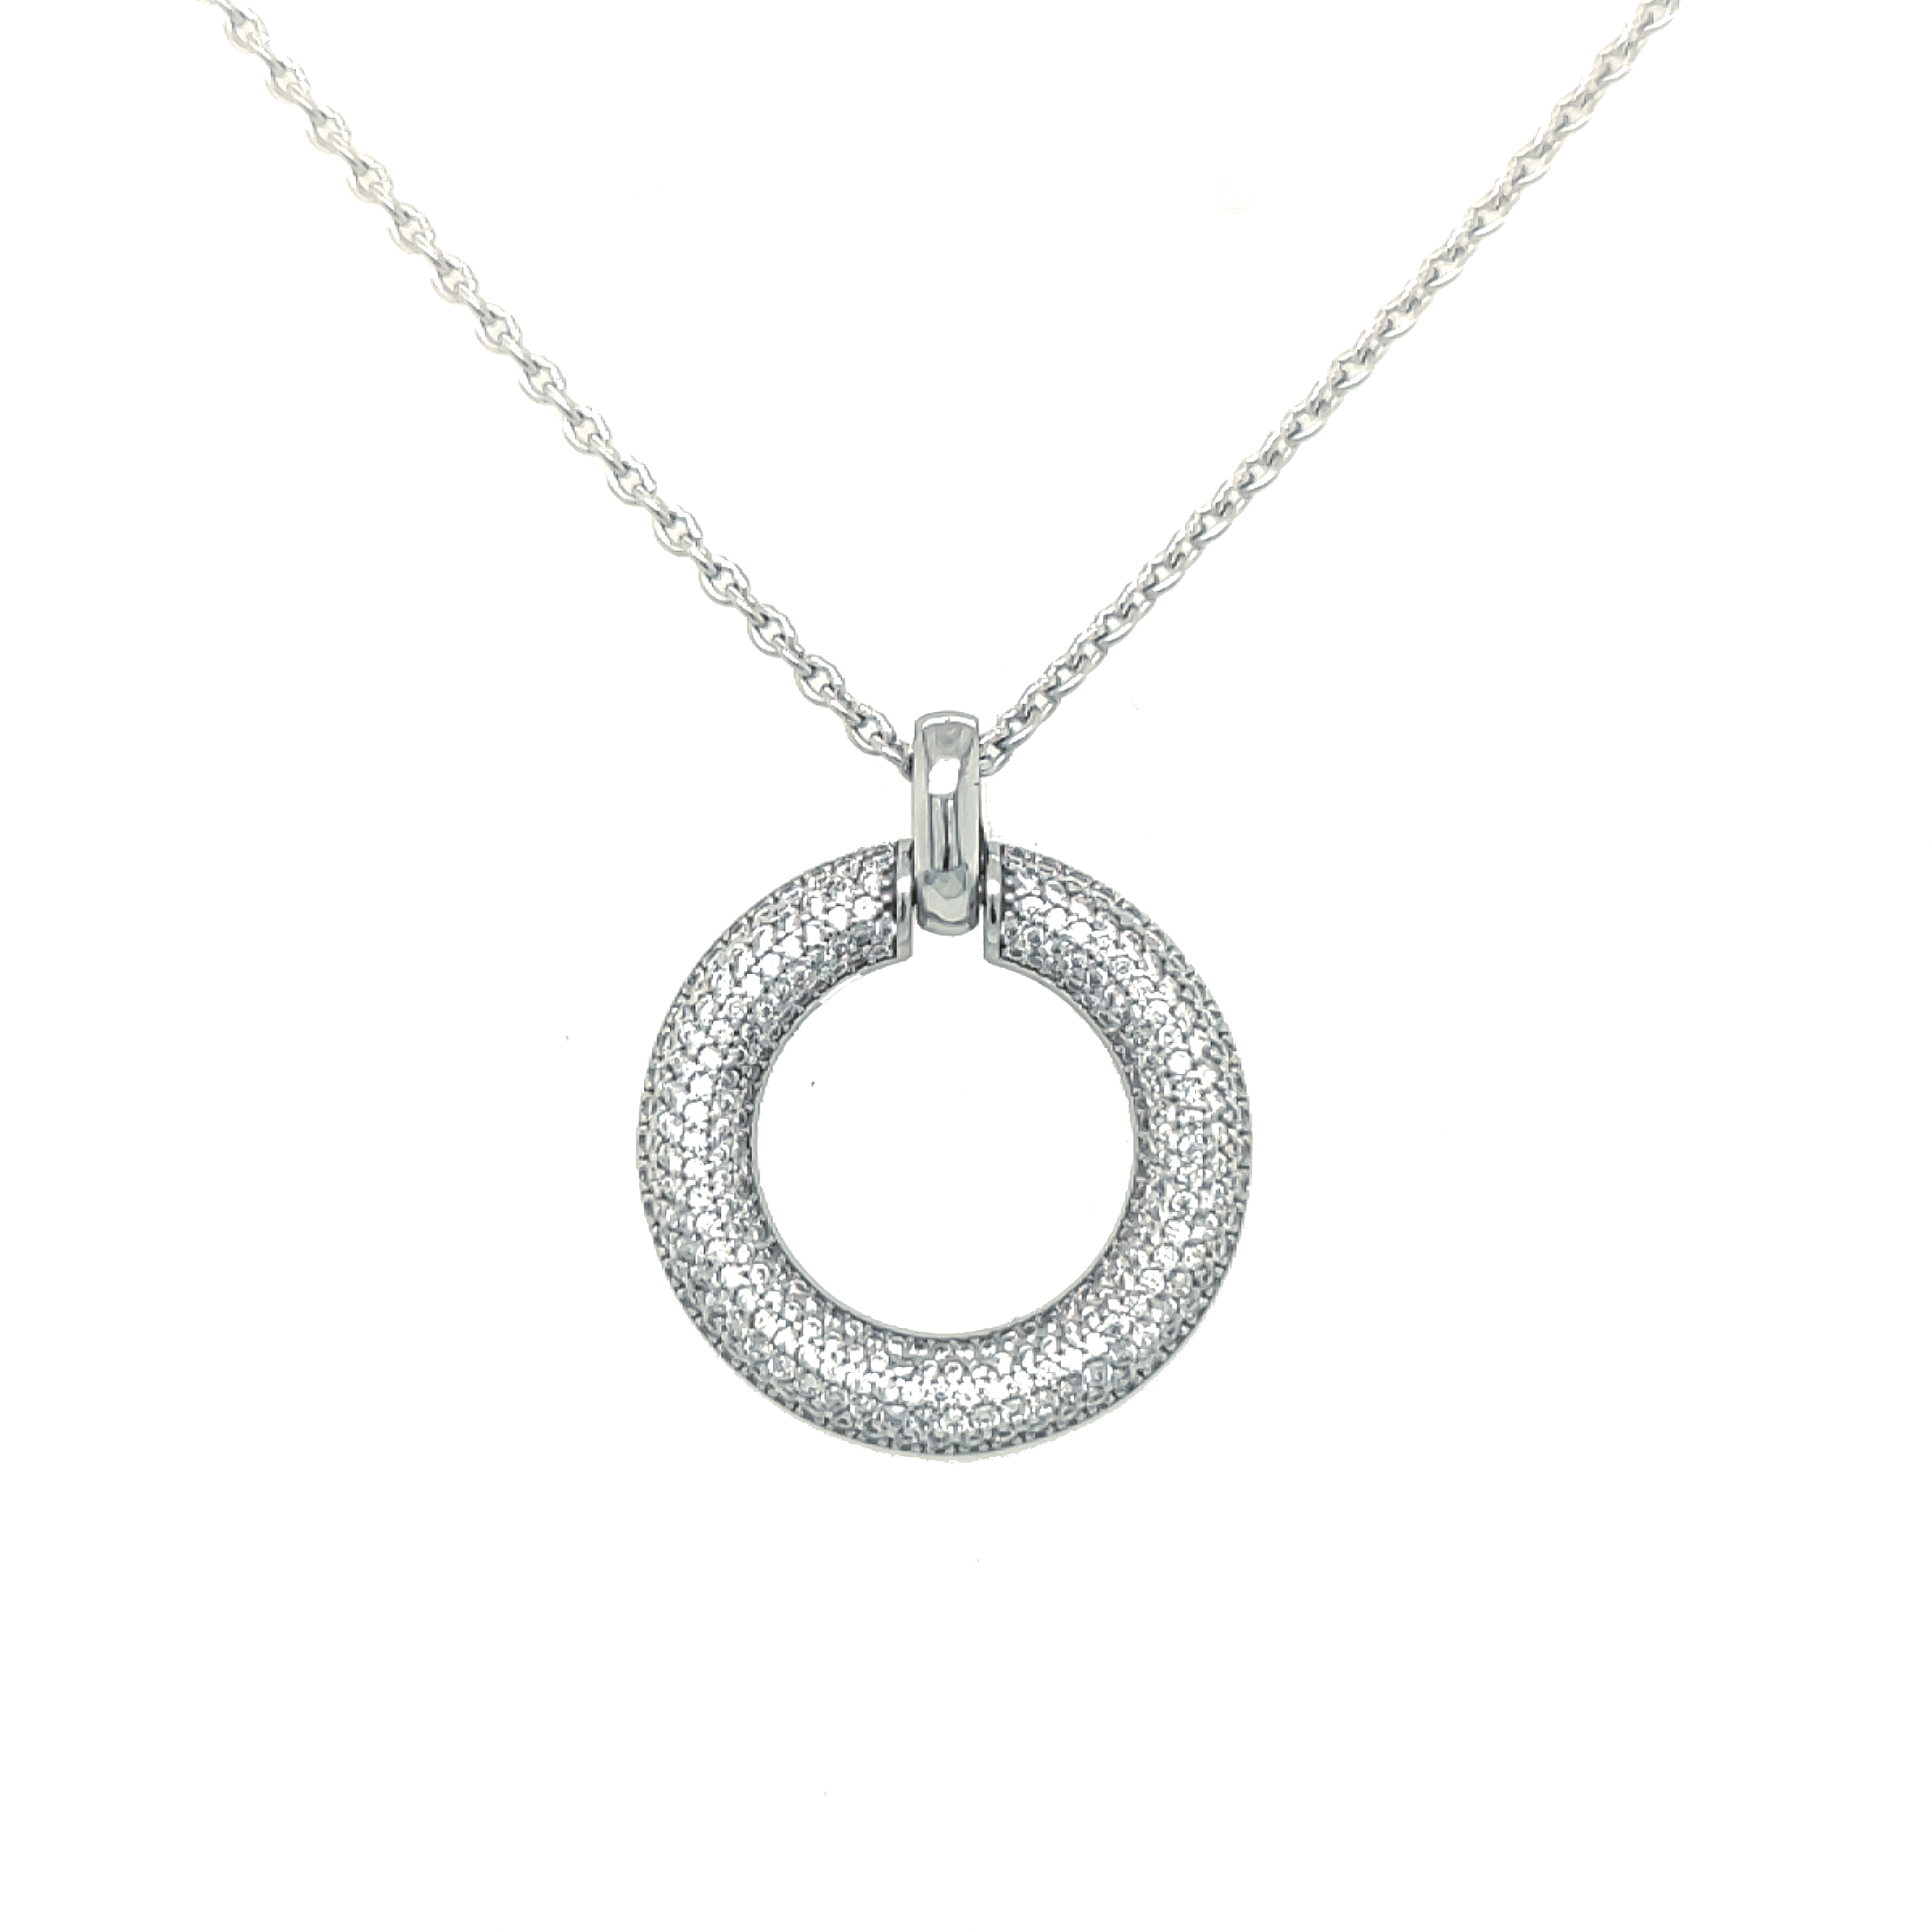 Asfour-Crystal-Sterling-Silver-925-Necklace-N1824